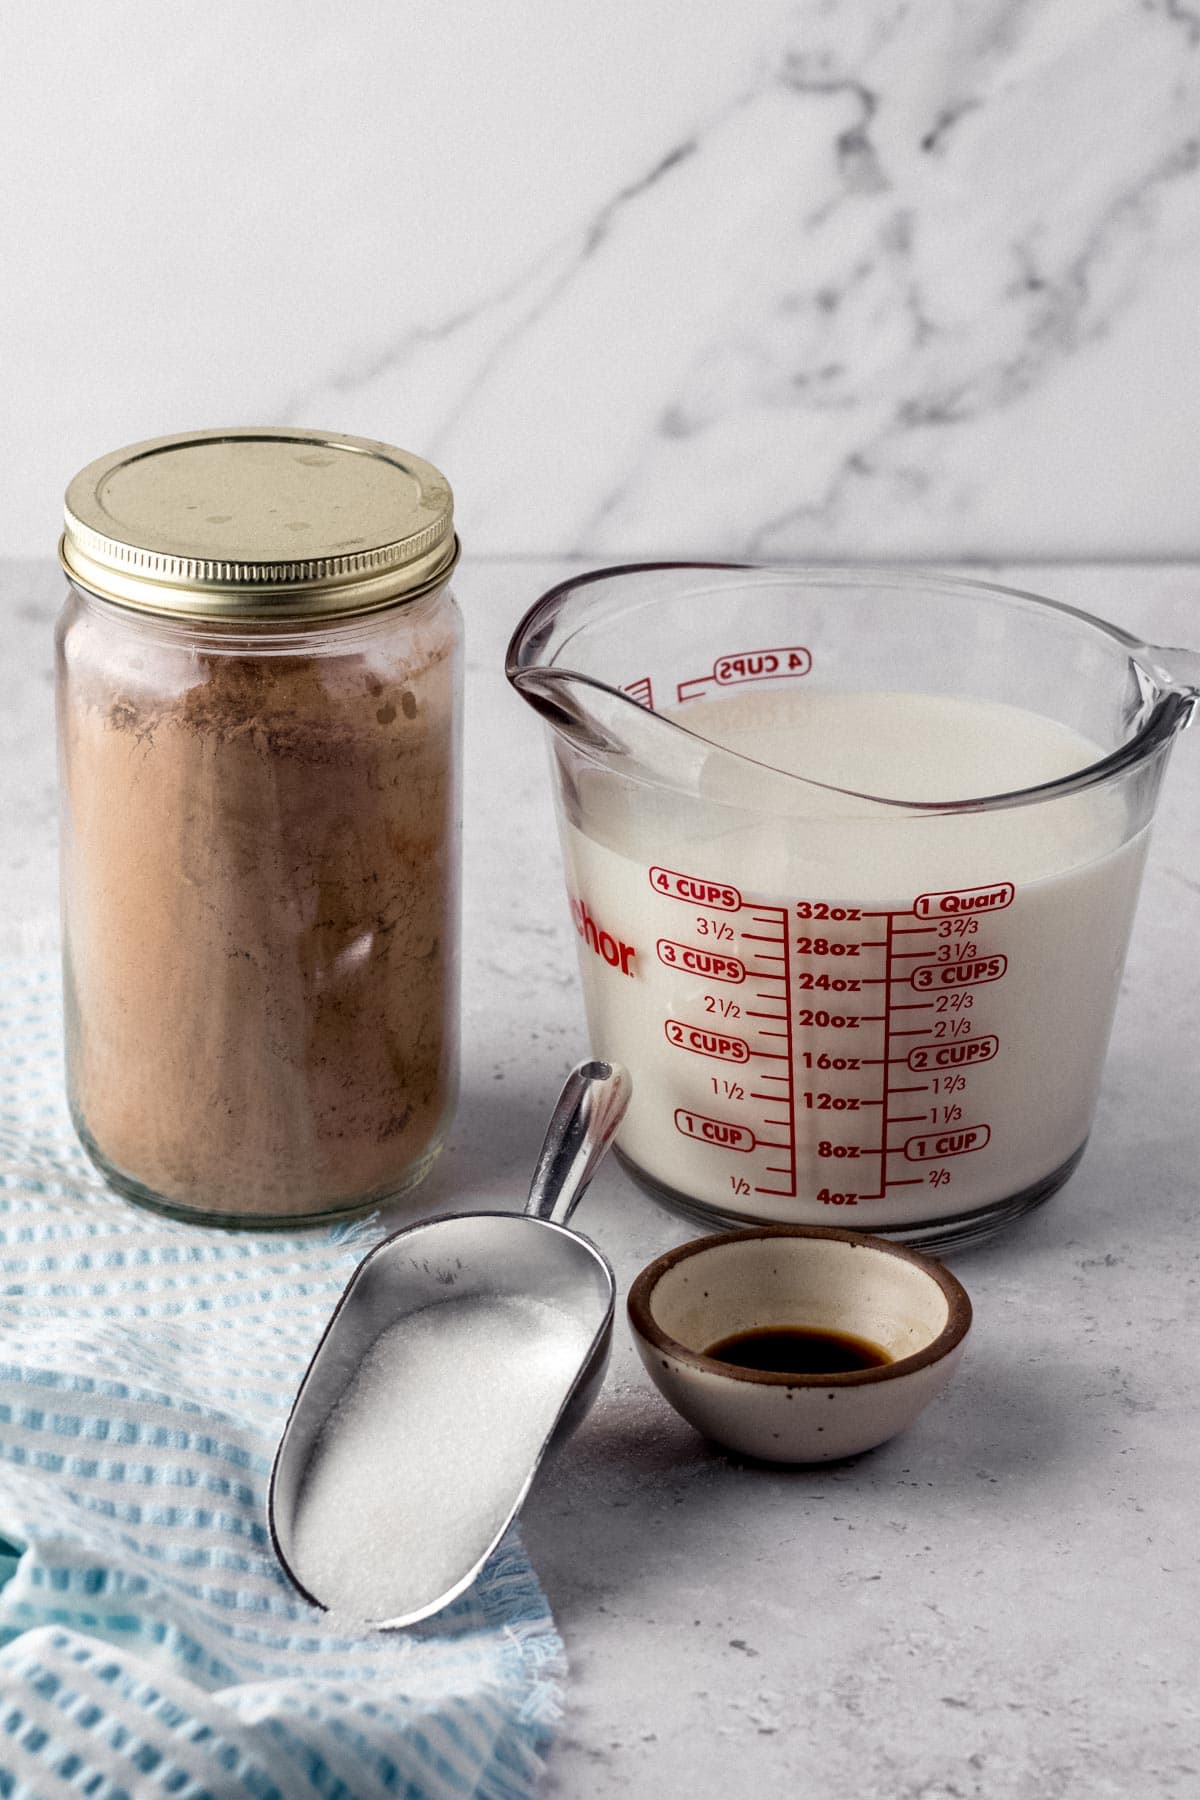 Chocolate Milk ingredients in separate containers